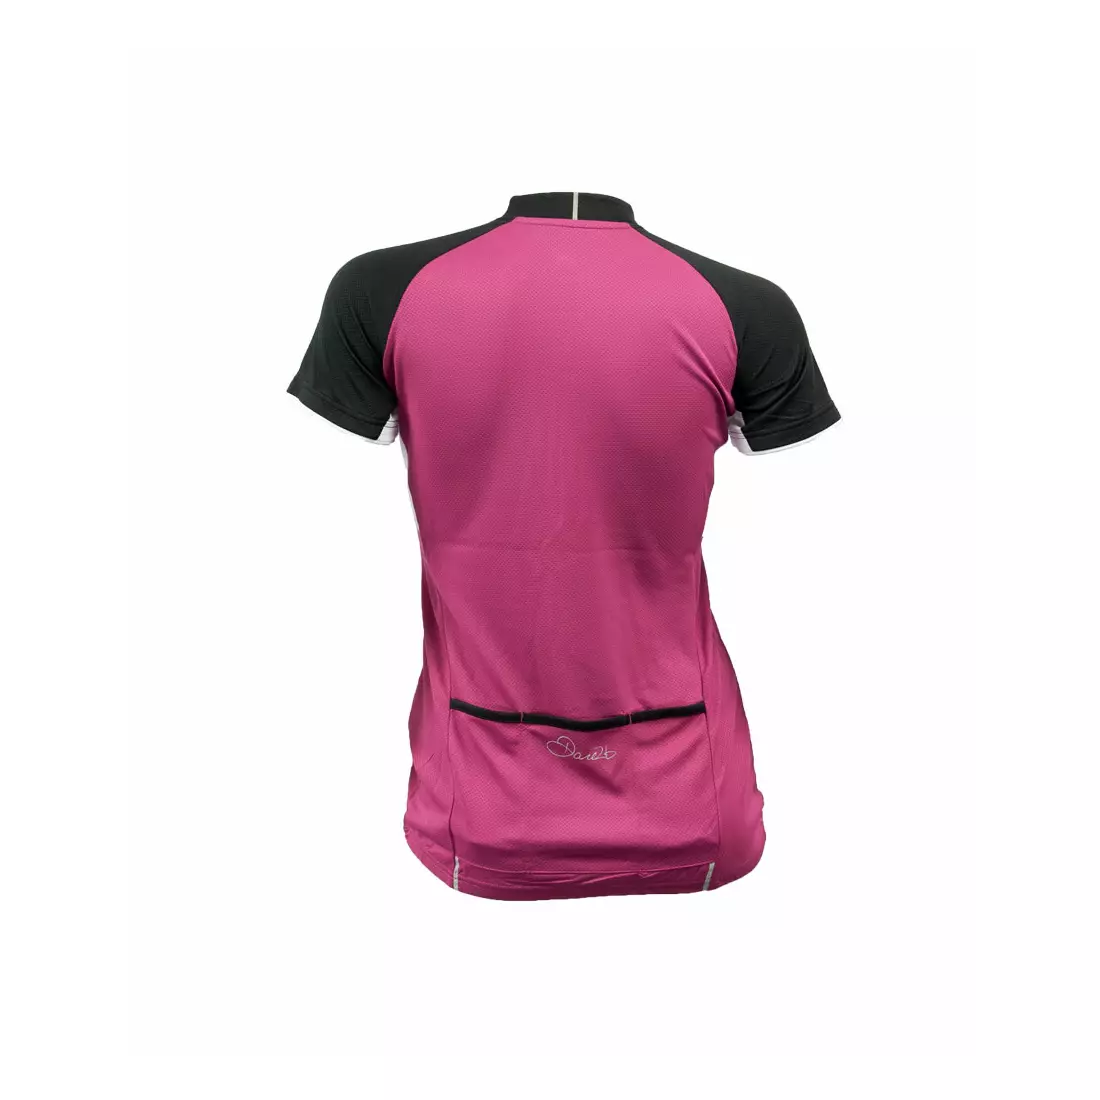 DARE2B ABSCOND - women's cycling jersey, DWT108-6N5